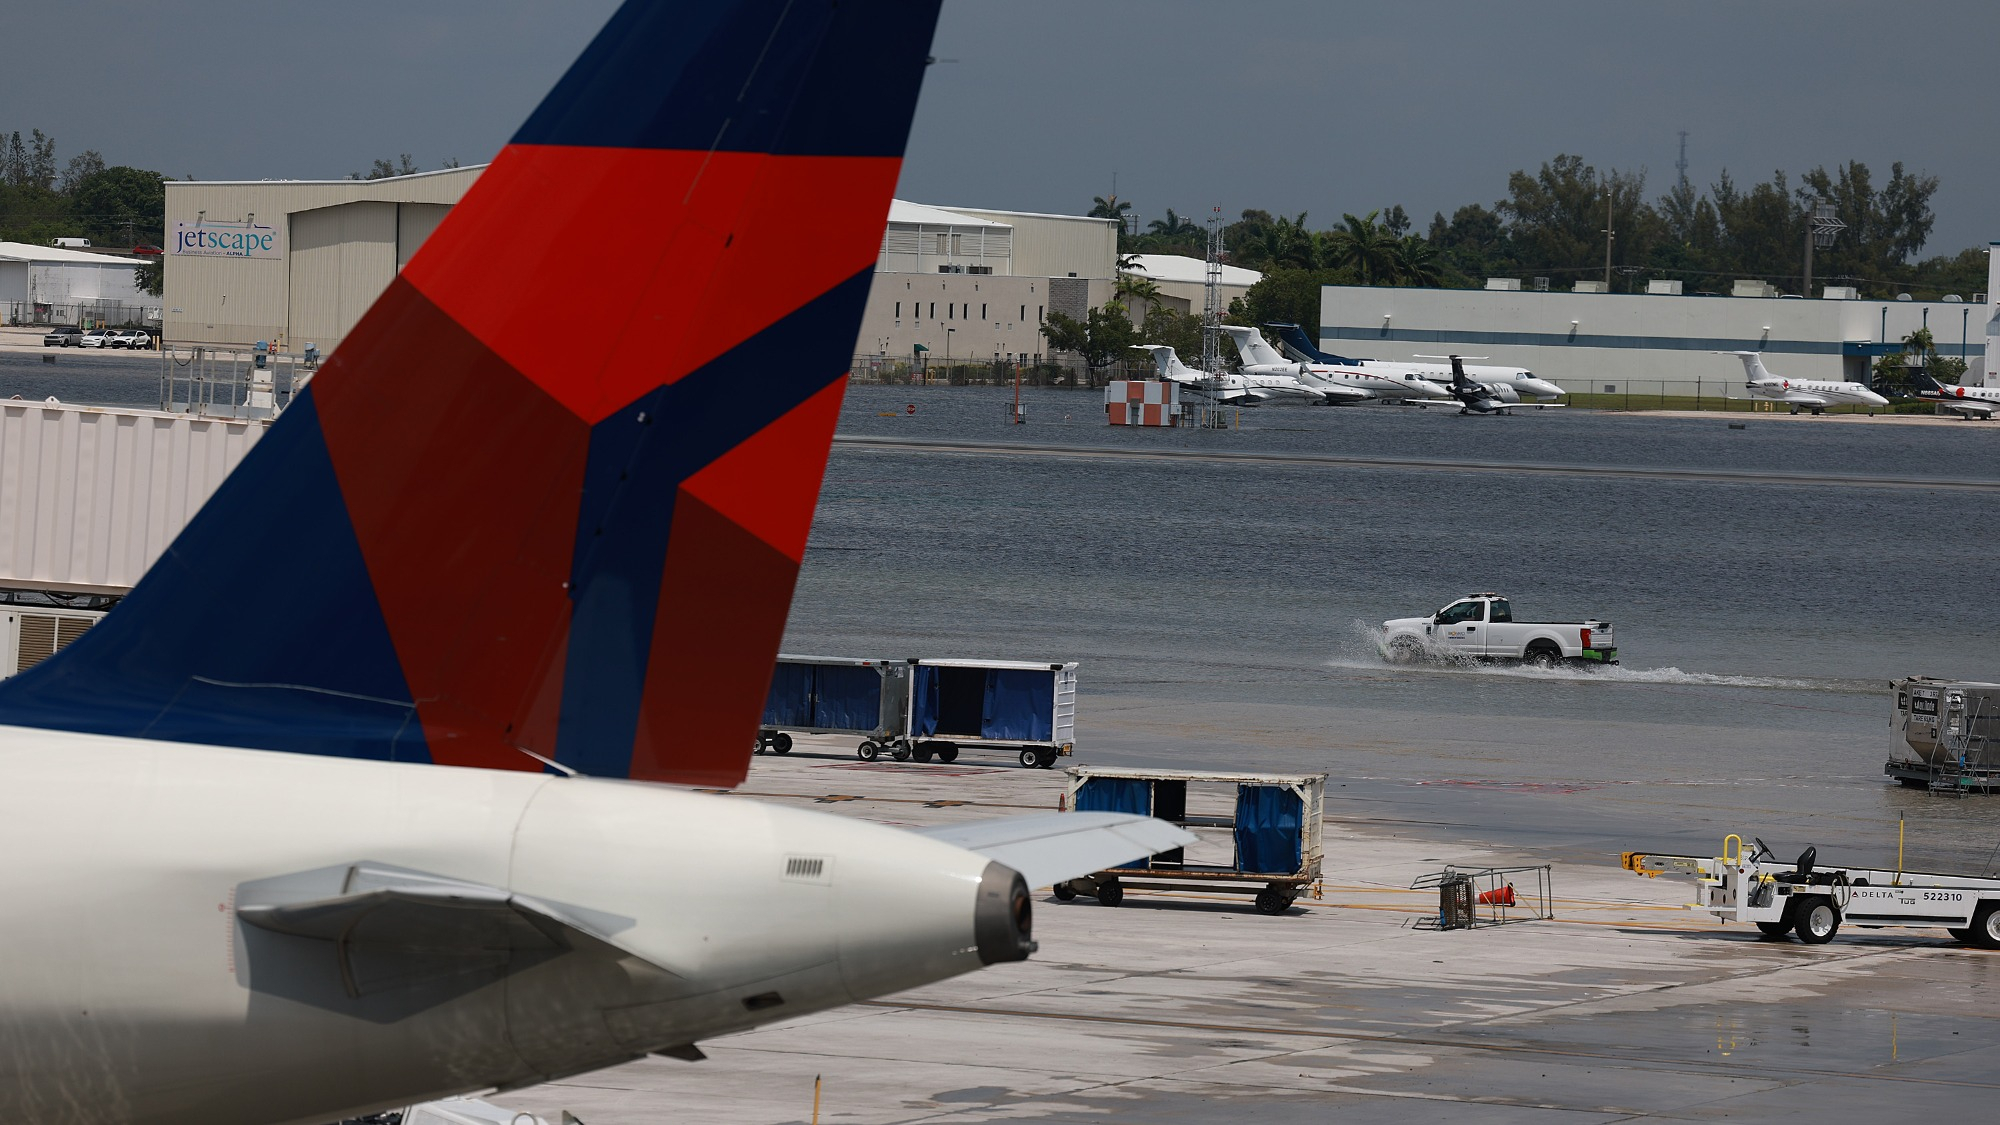 Planes sit at their gates after the Fort Lauderdale-Hollywood International Airport was closed due to the runways being flooded on April 13, 2023 in Fort Lauderdale, Florida. The heavy rain caused flooding as the region recorded rainfall totals of more than a foot.